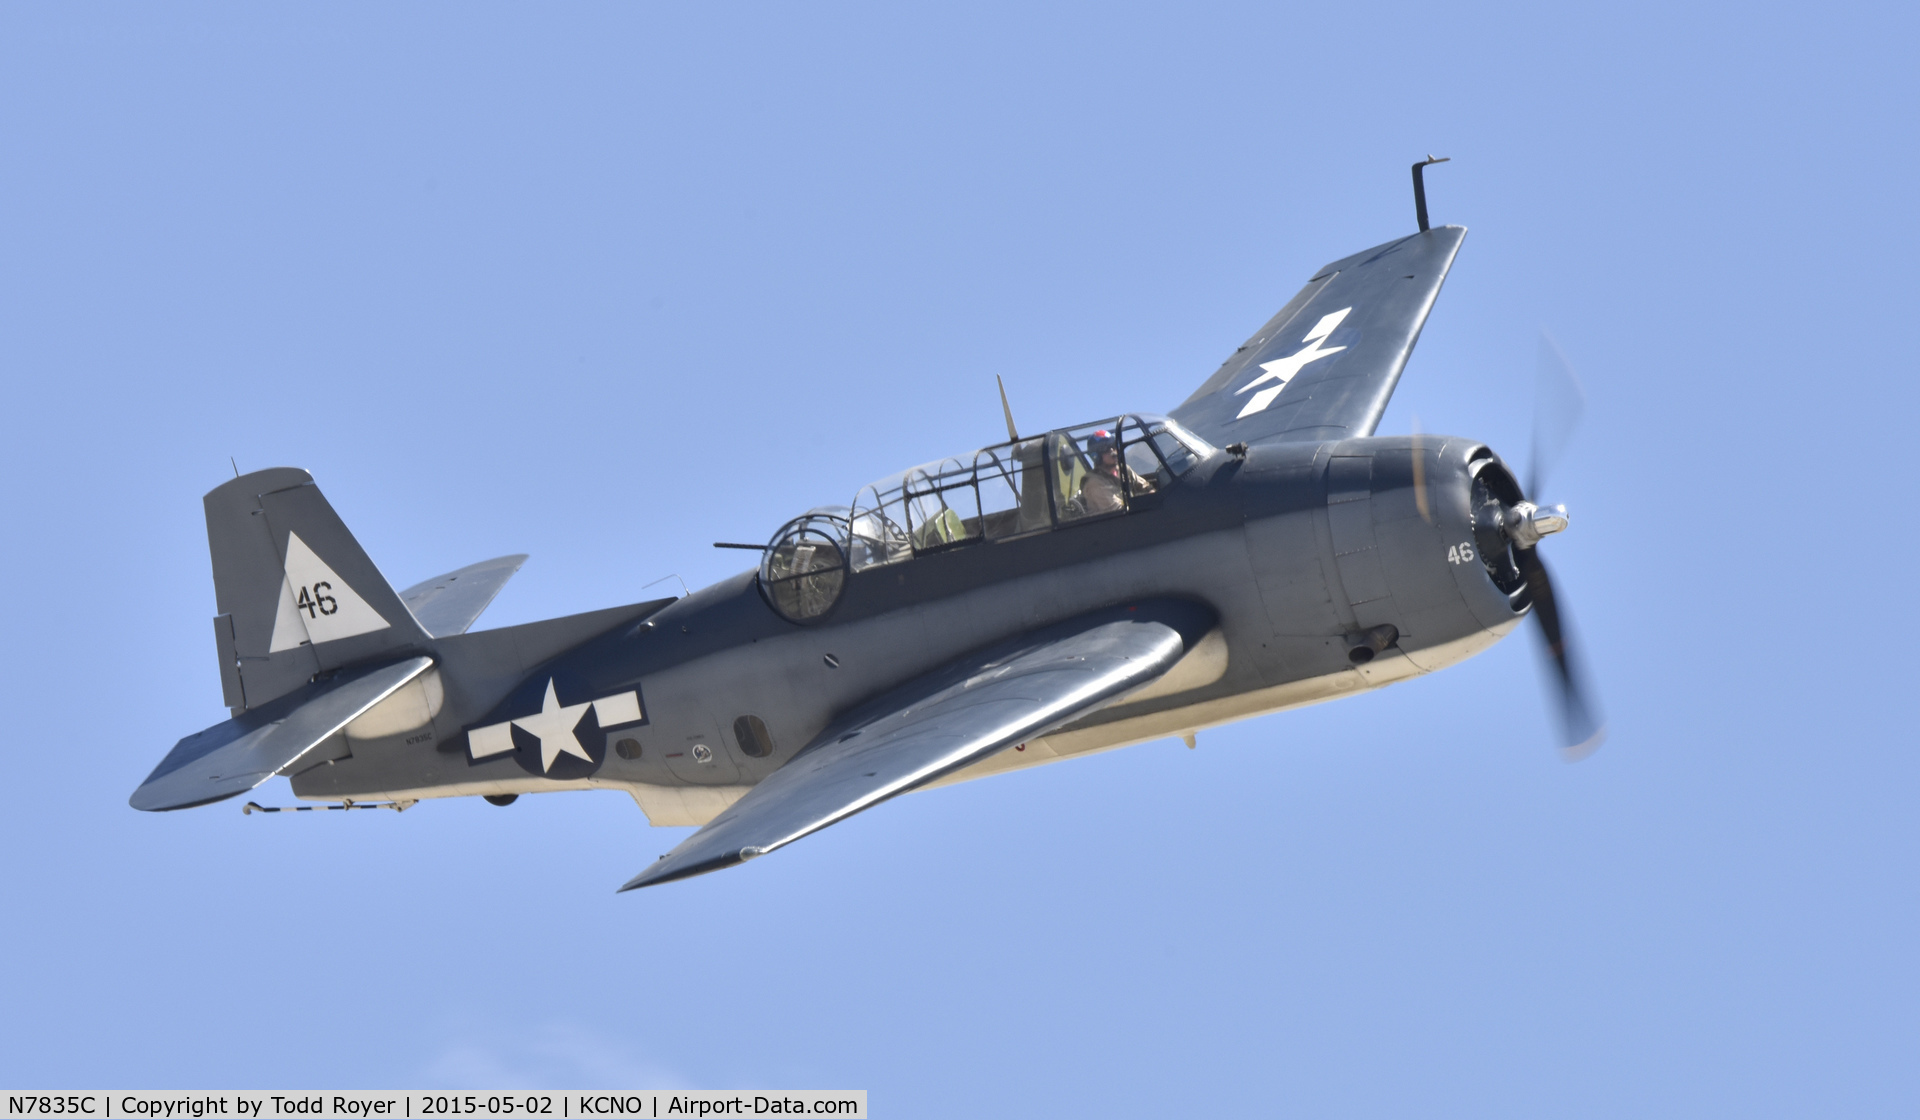 N7835C, Grumman TBM-3E Avenger C/N 7154, Flying at the Planes of Fame Airshow